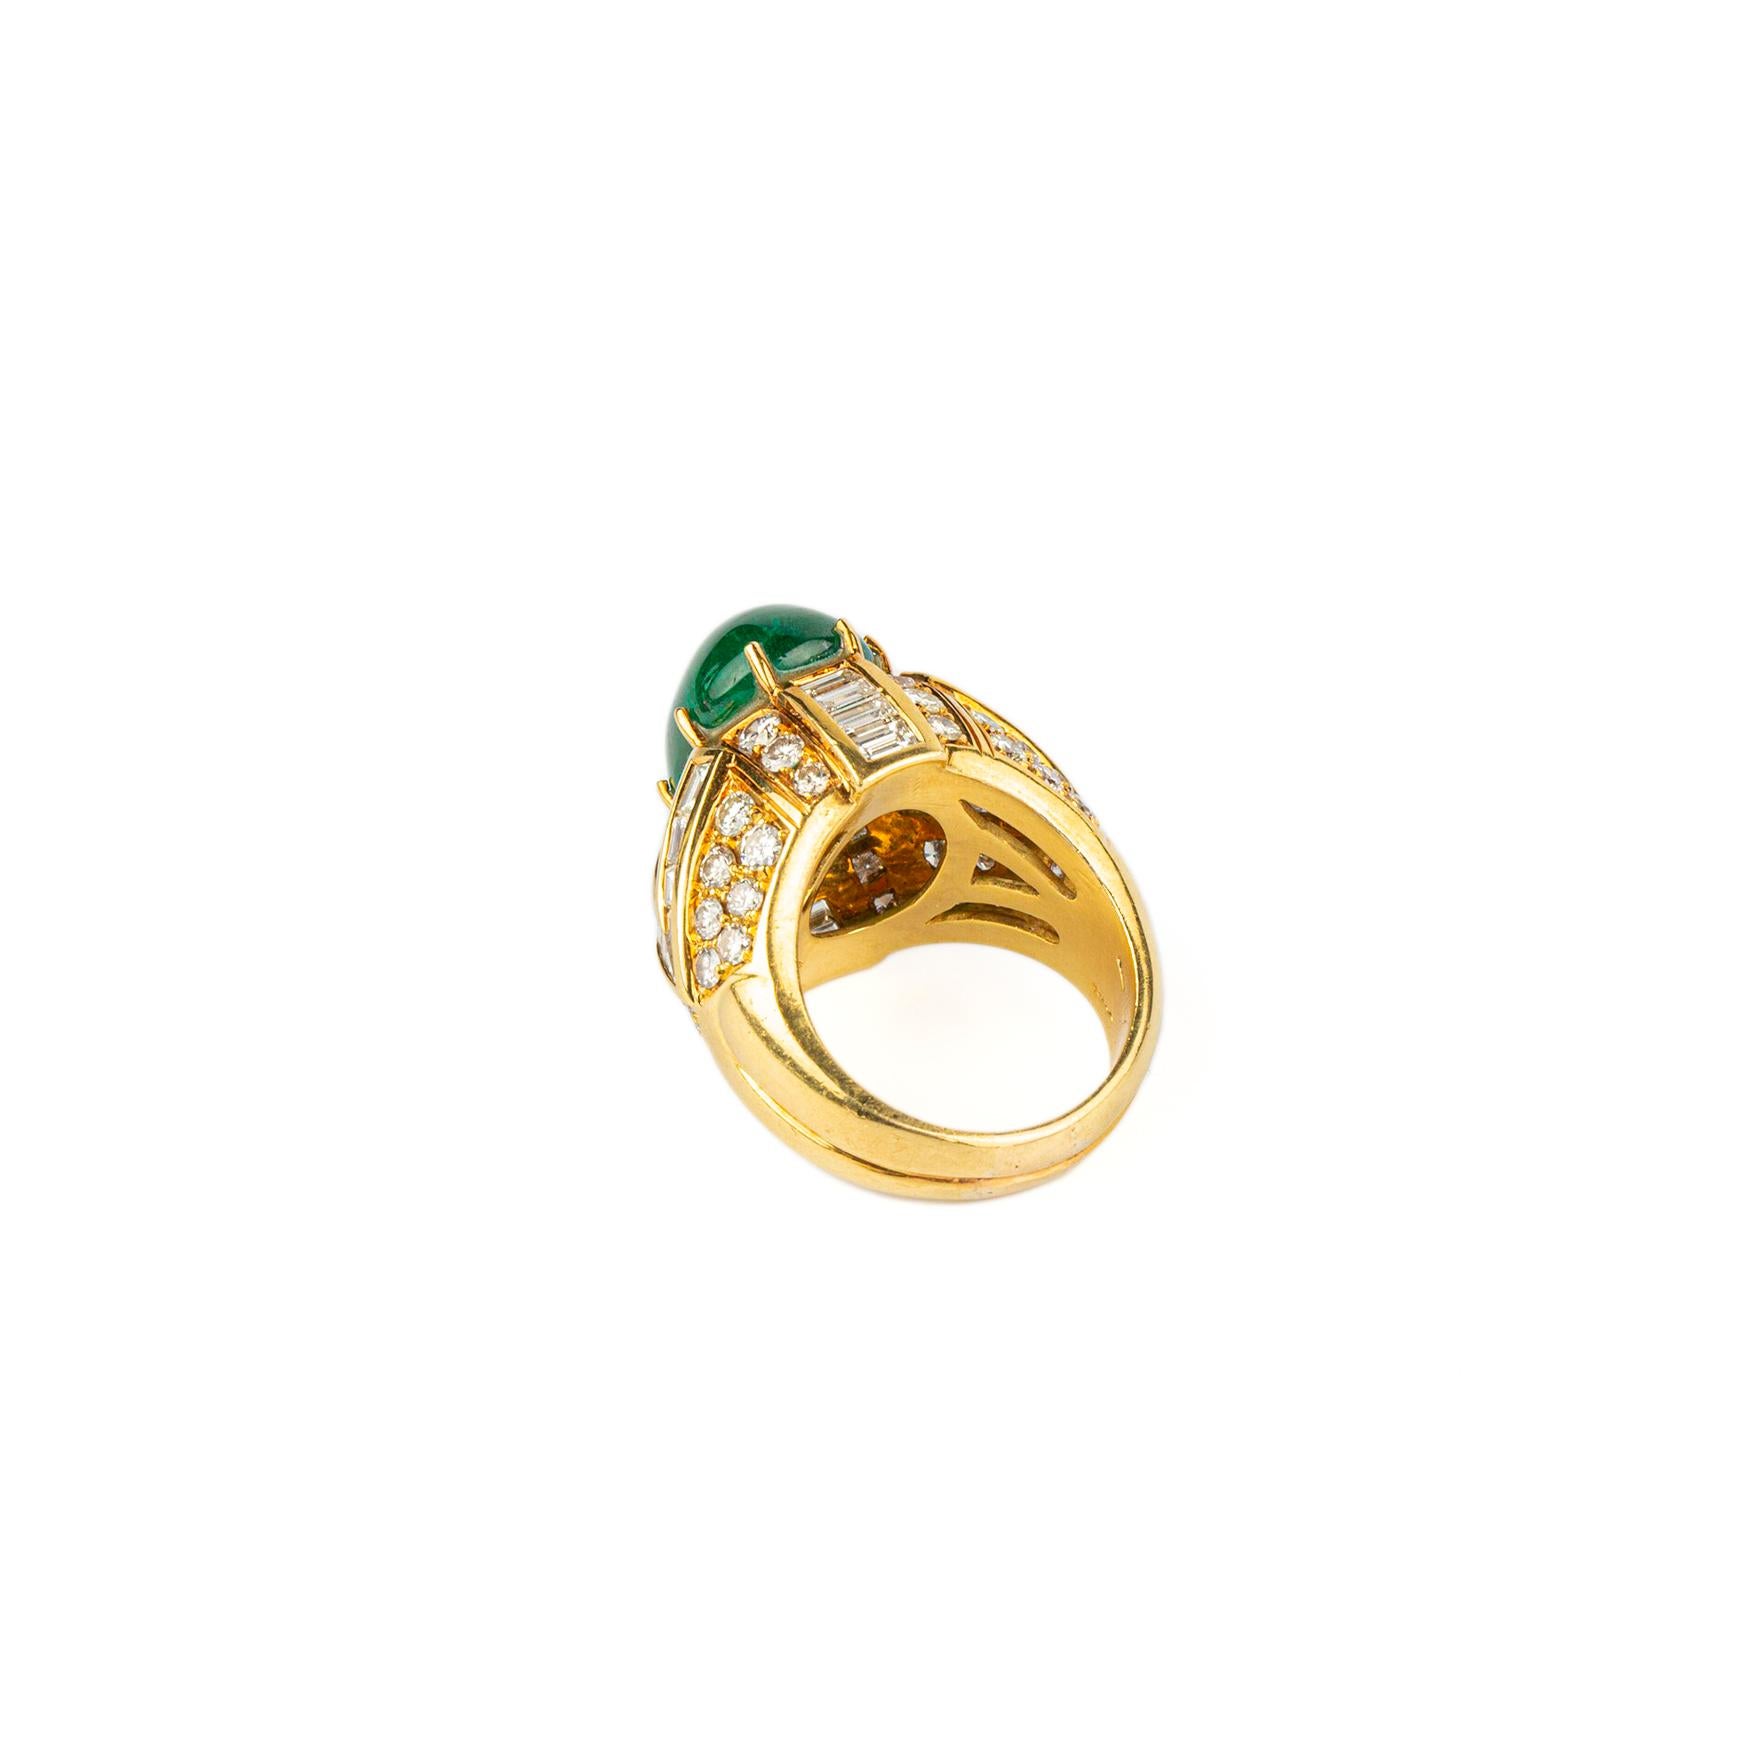 Giovane Cabochon Emerald Diamond Gold Ring In Excellent Condition For Sale In New York, NY